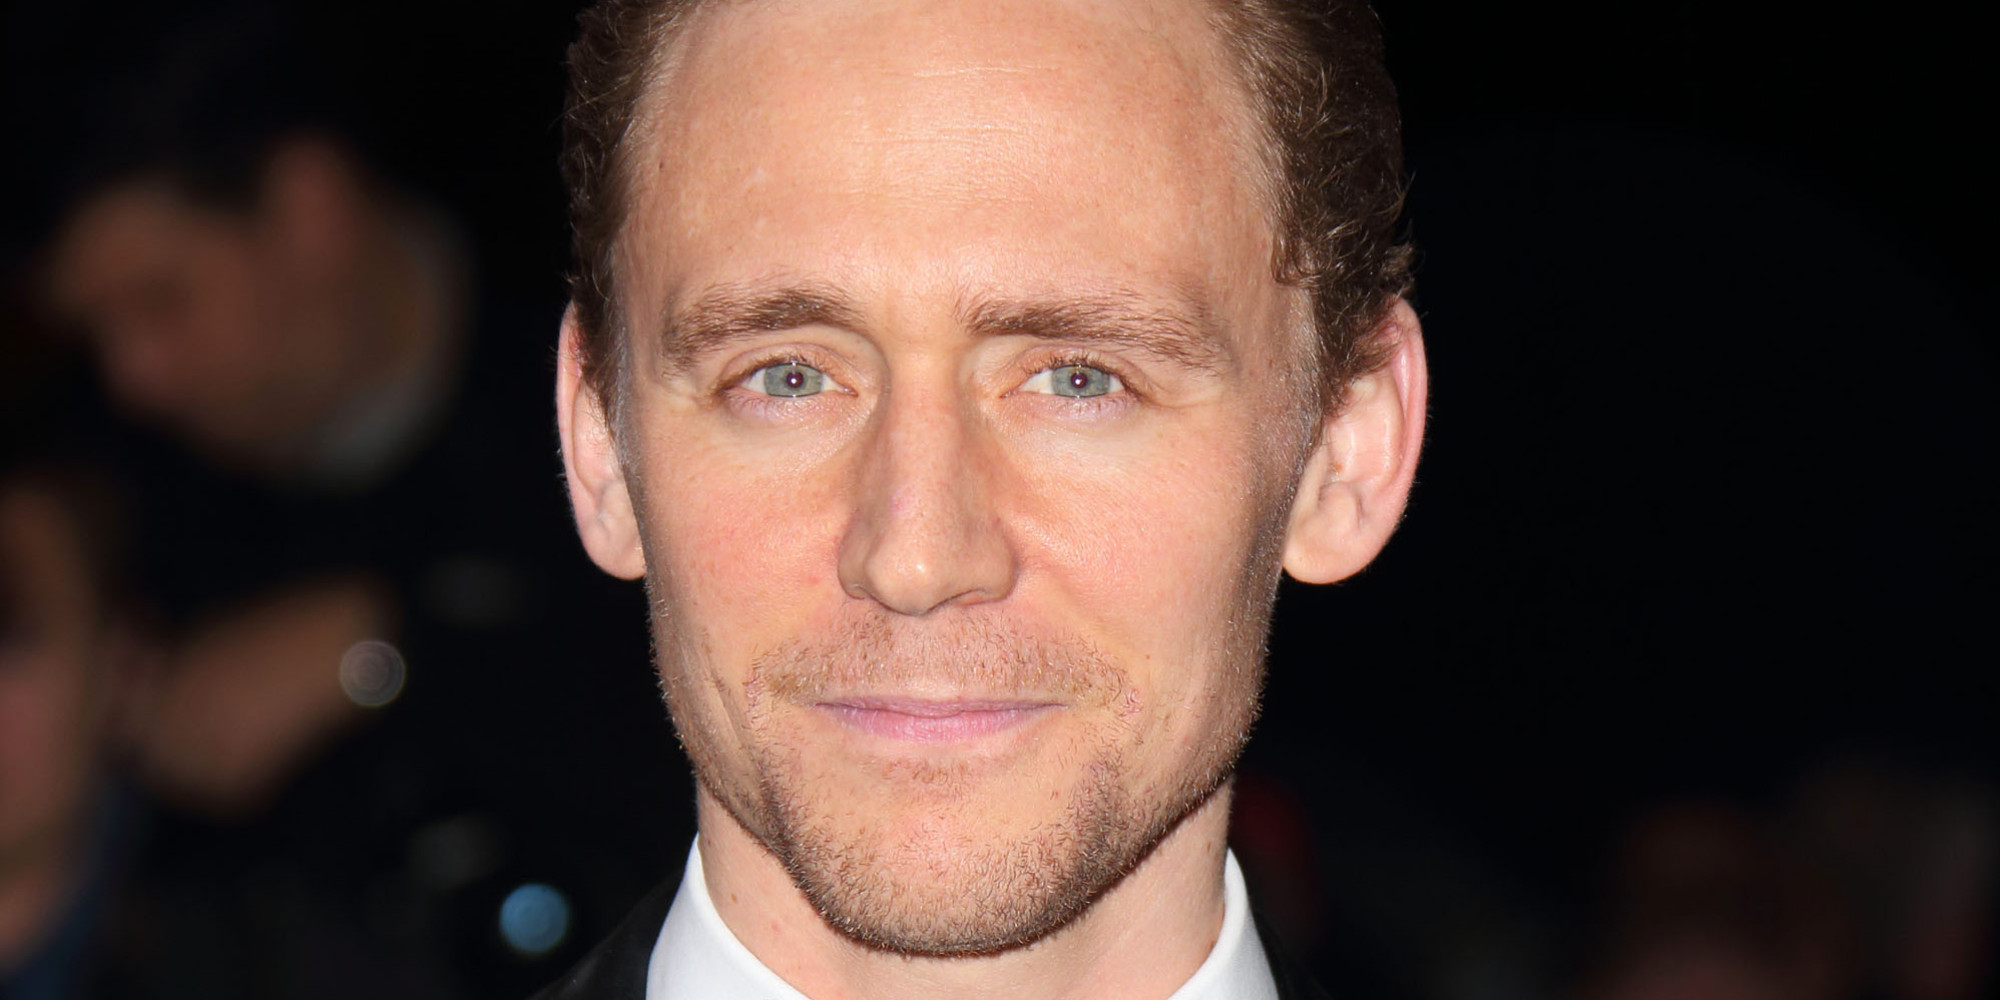 Tom hiddleston’s charming thank-you email to joss whedon